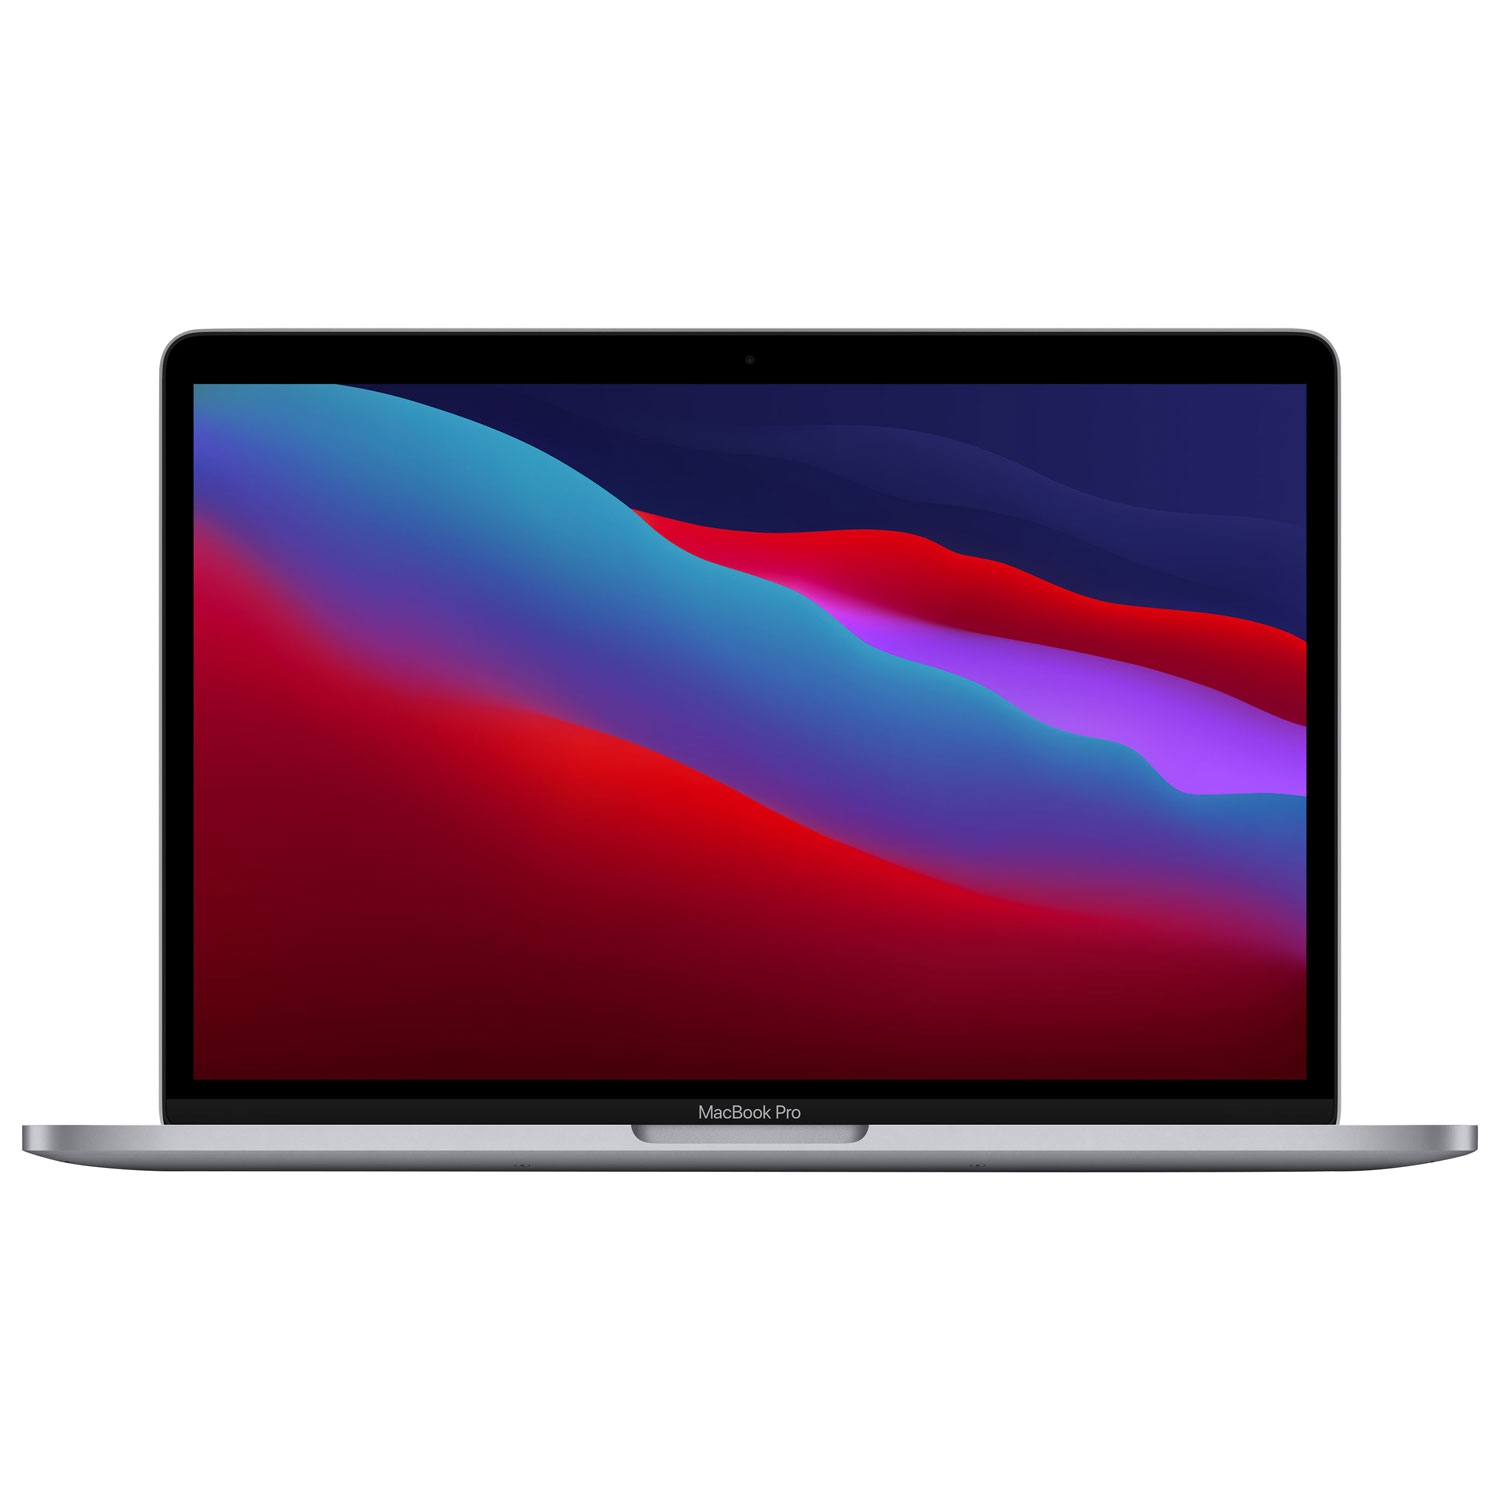 Apple MacBook Pro 13.3" w/ Touch Bar (Fall 2020) - Space Grey ( Apple M1 Chip / 256GB SSD / 8GB RAM ) - Apple Care+ Expires November 2024 - En - Open Box ( 10 / 10 Condition )